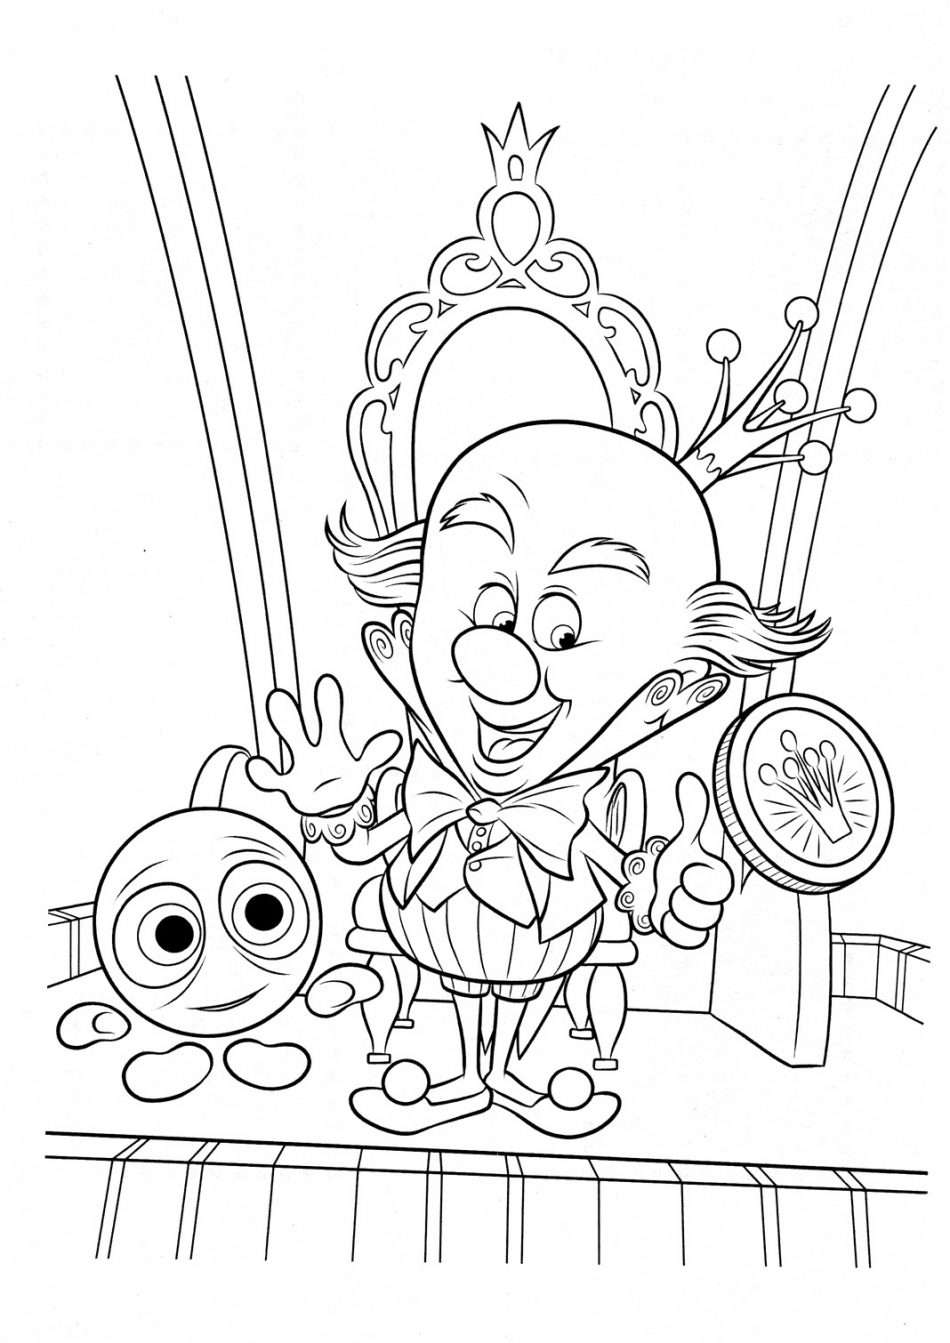 King Candy Is The Ruler of Sugar Rush Coloring Page